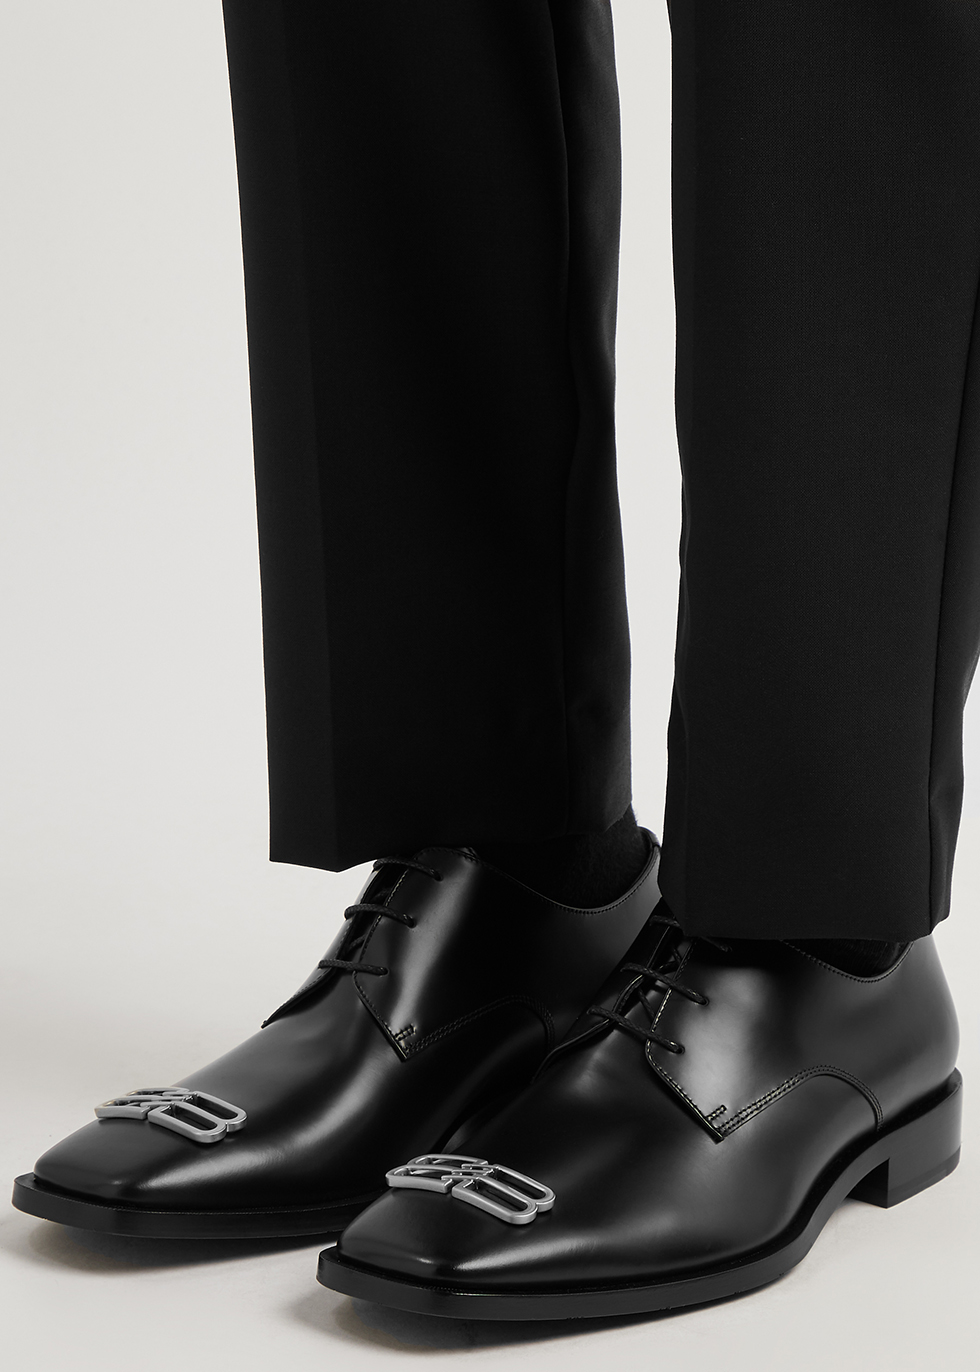 Big Steppers in the Balenciaga Steroid Derby Shoes and Boots  SNKRDUNK  Magazine